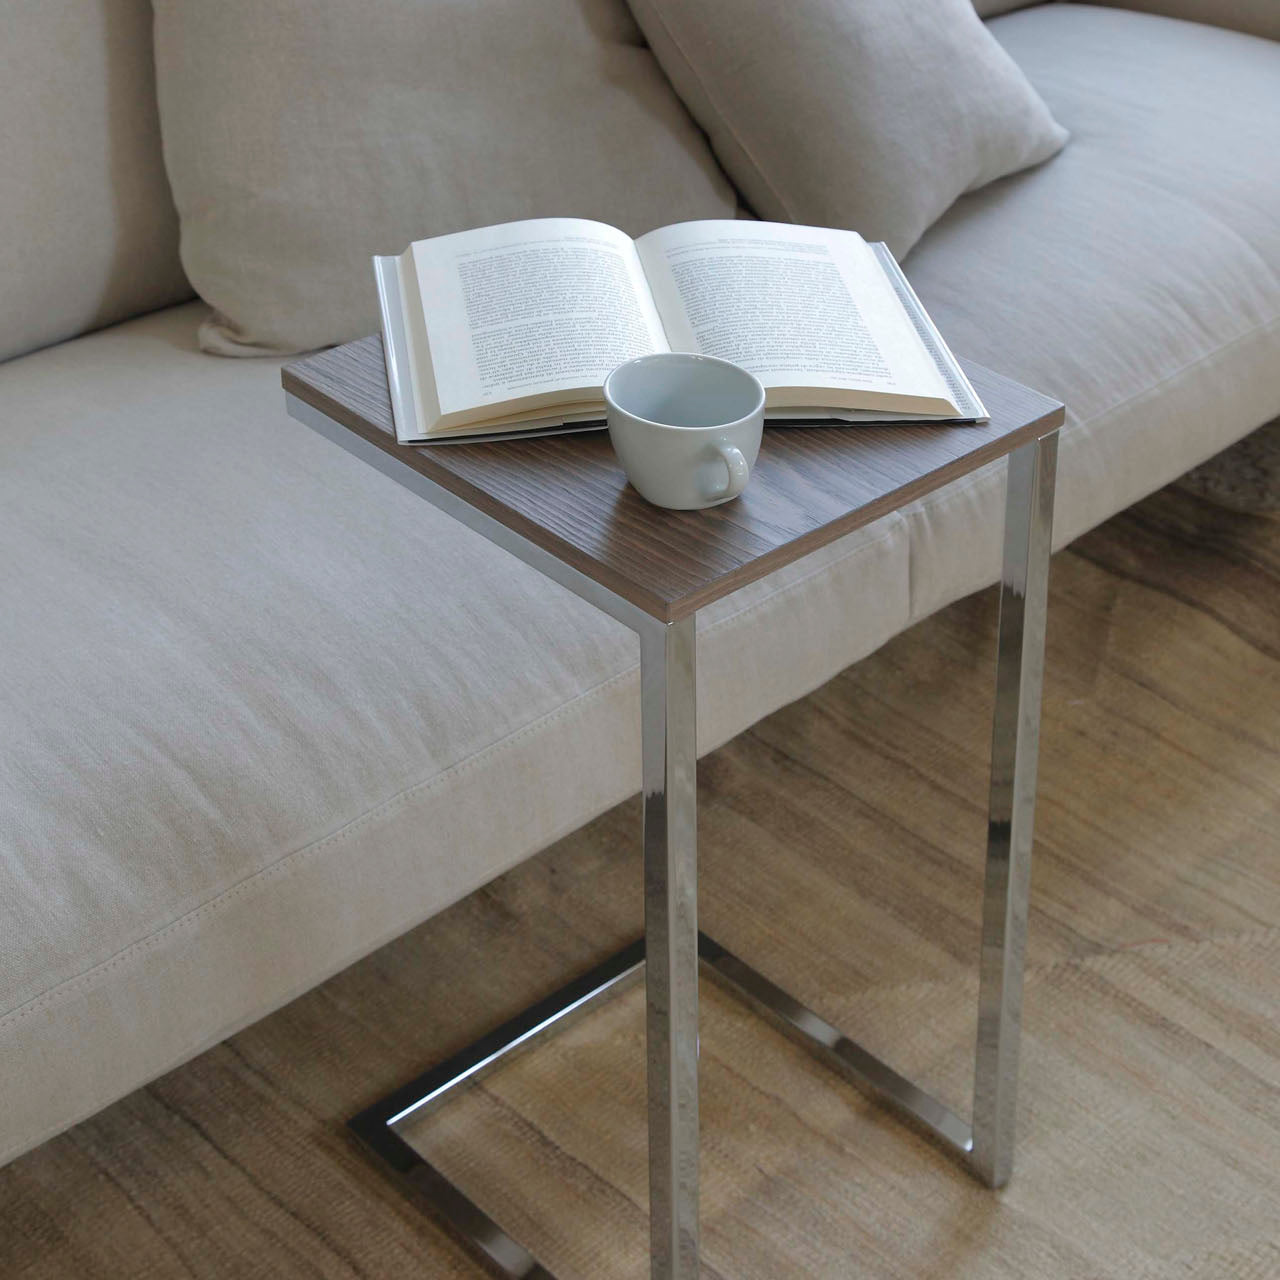 TOWER side table